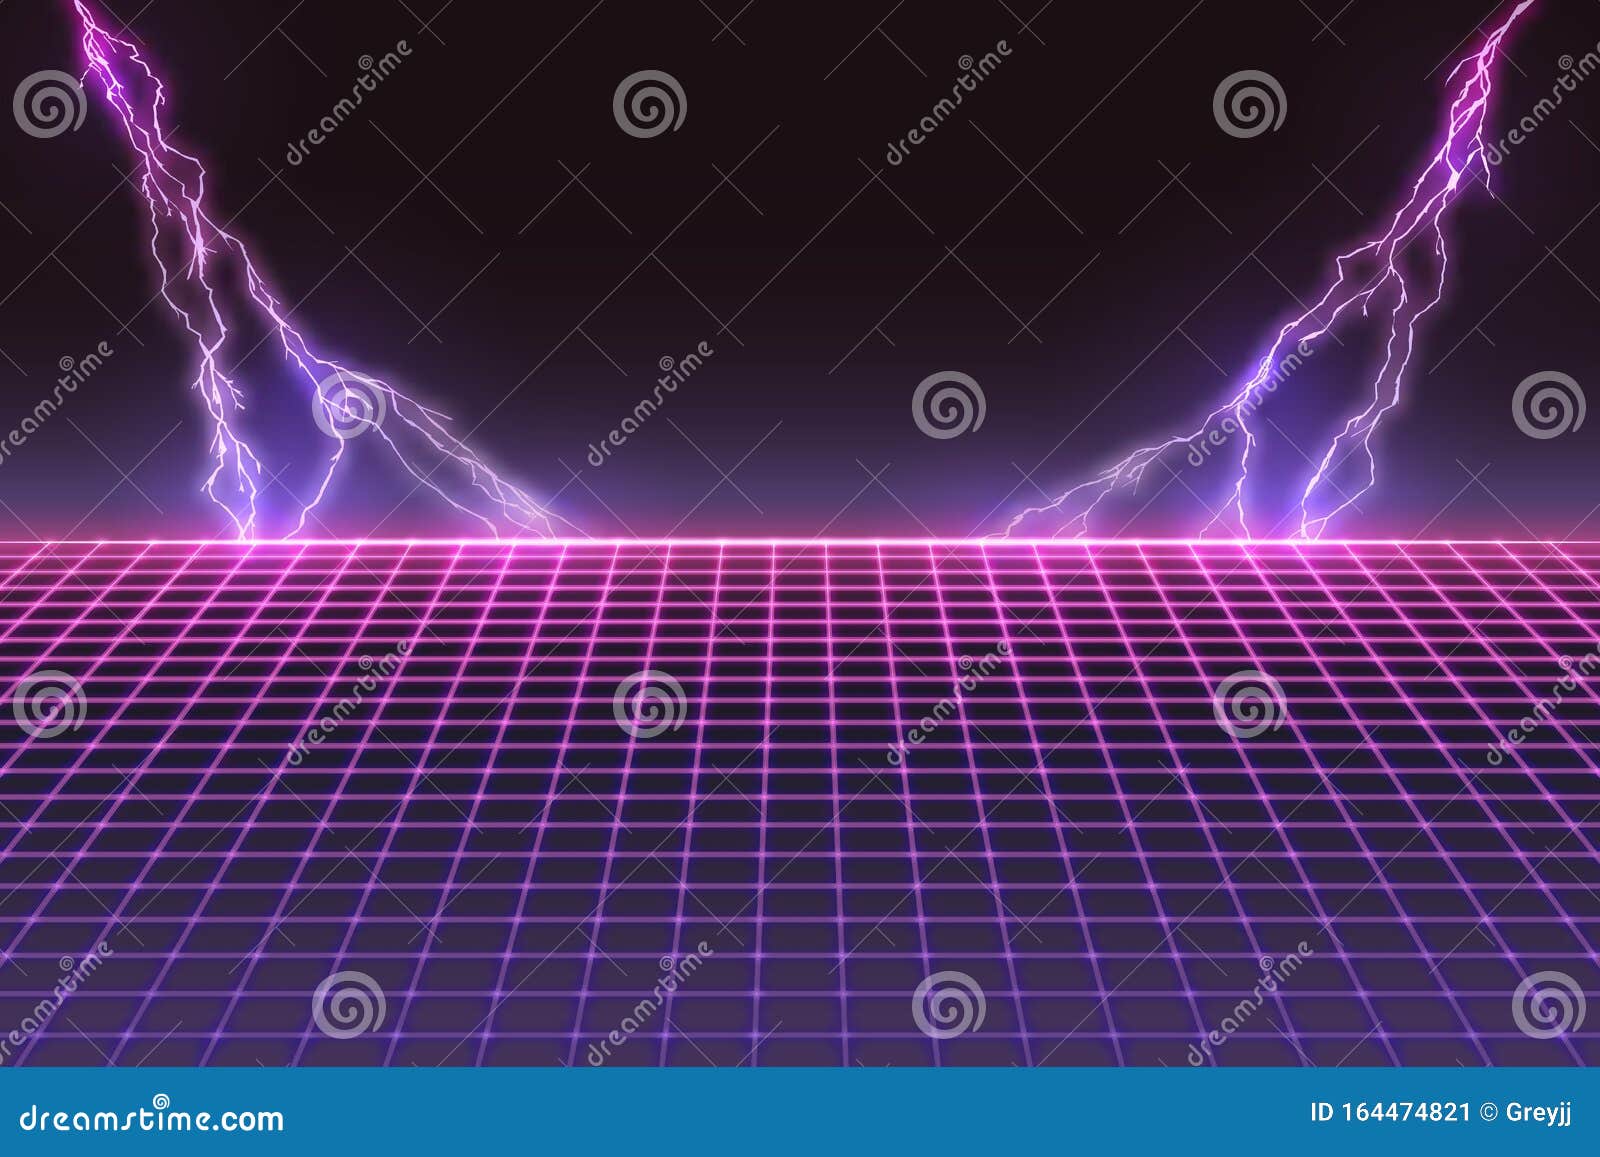 laser grid with bolts of lightning. retro futuristic template in 80s style